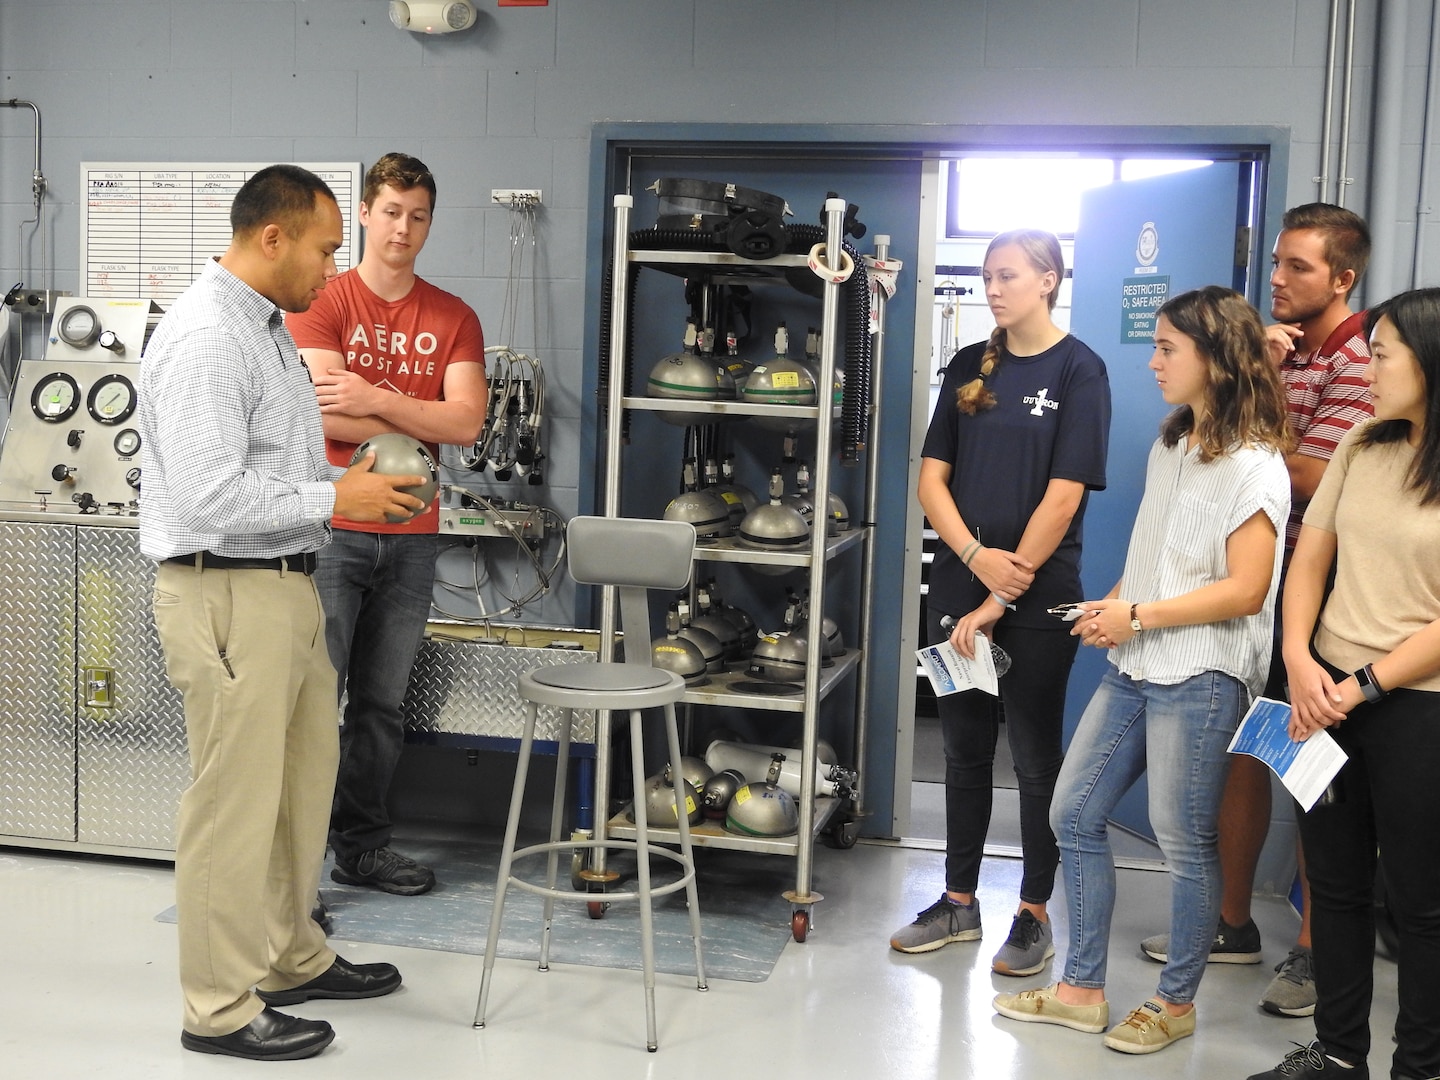 Naval Research Enterprise Internship Program (NREIP) interns toured Naval Surface Warfare Center Panama City Division's (NSWC PCD) various facilities to learn more about the opportunities to work with many projects and mission areas at NSWC PCD June 13.